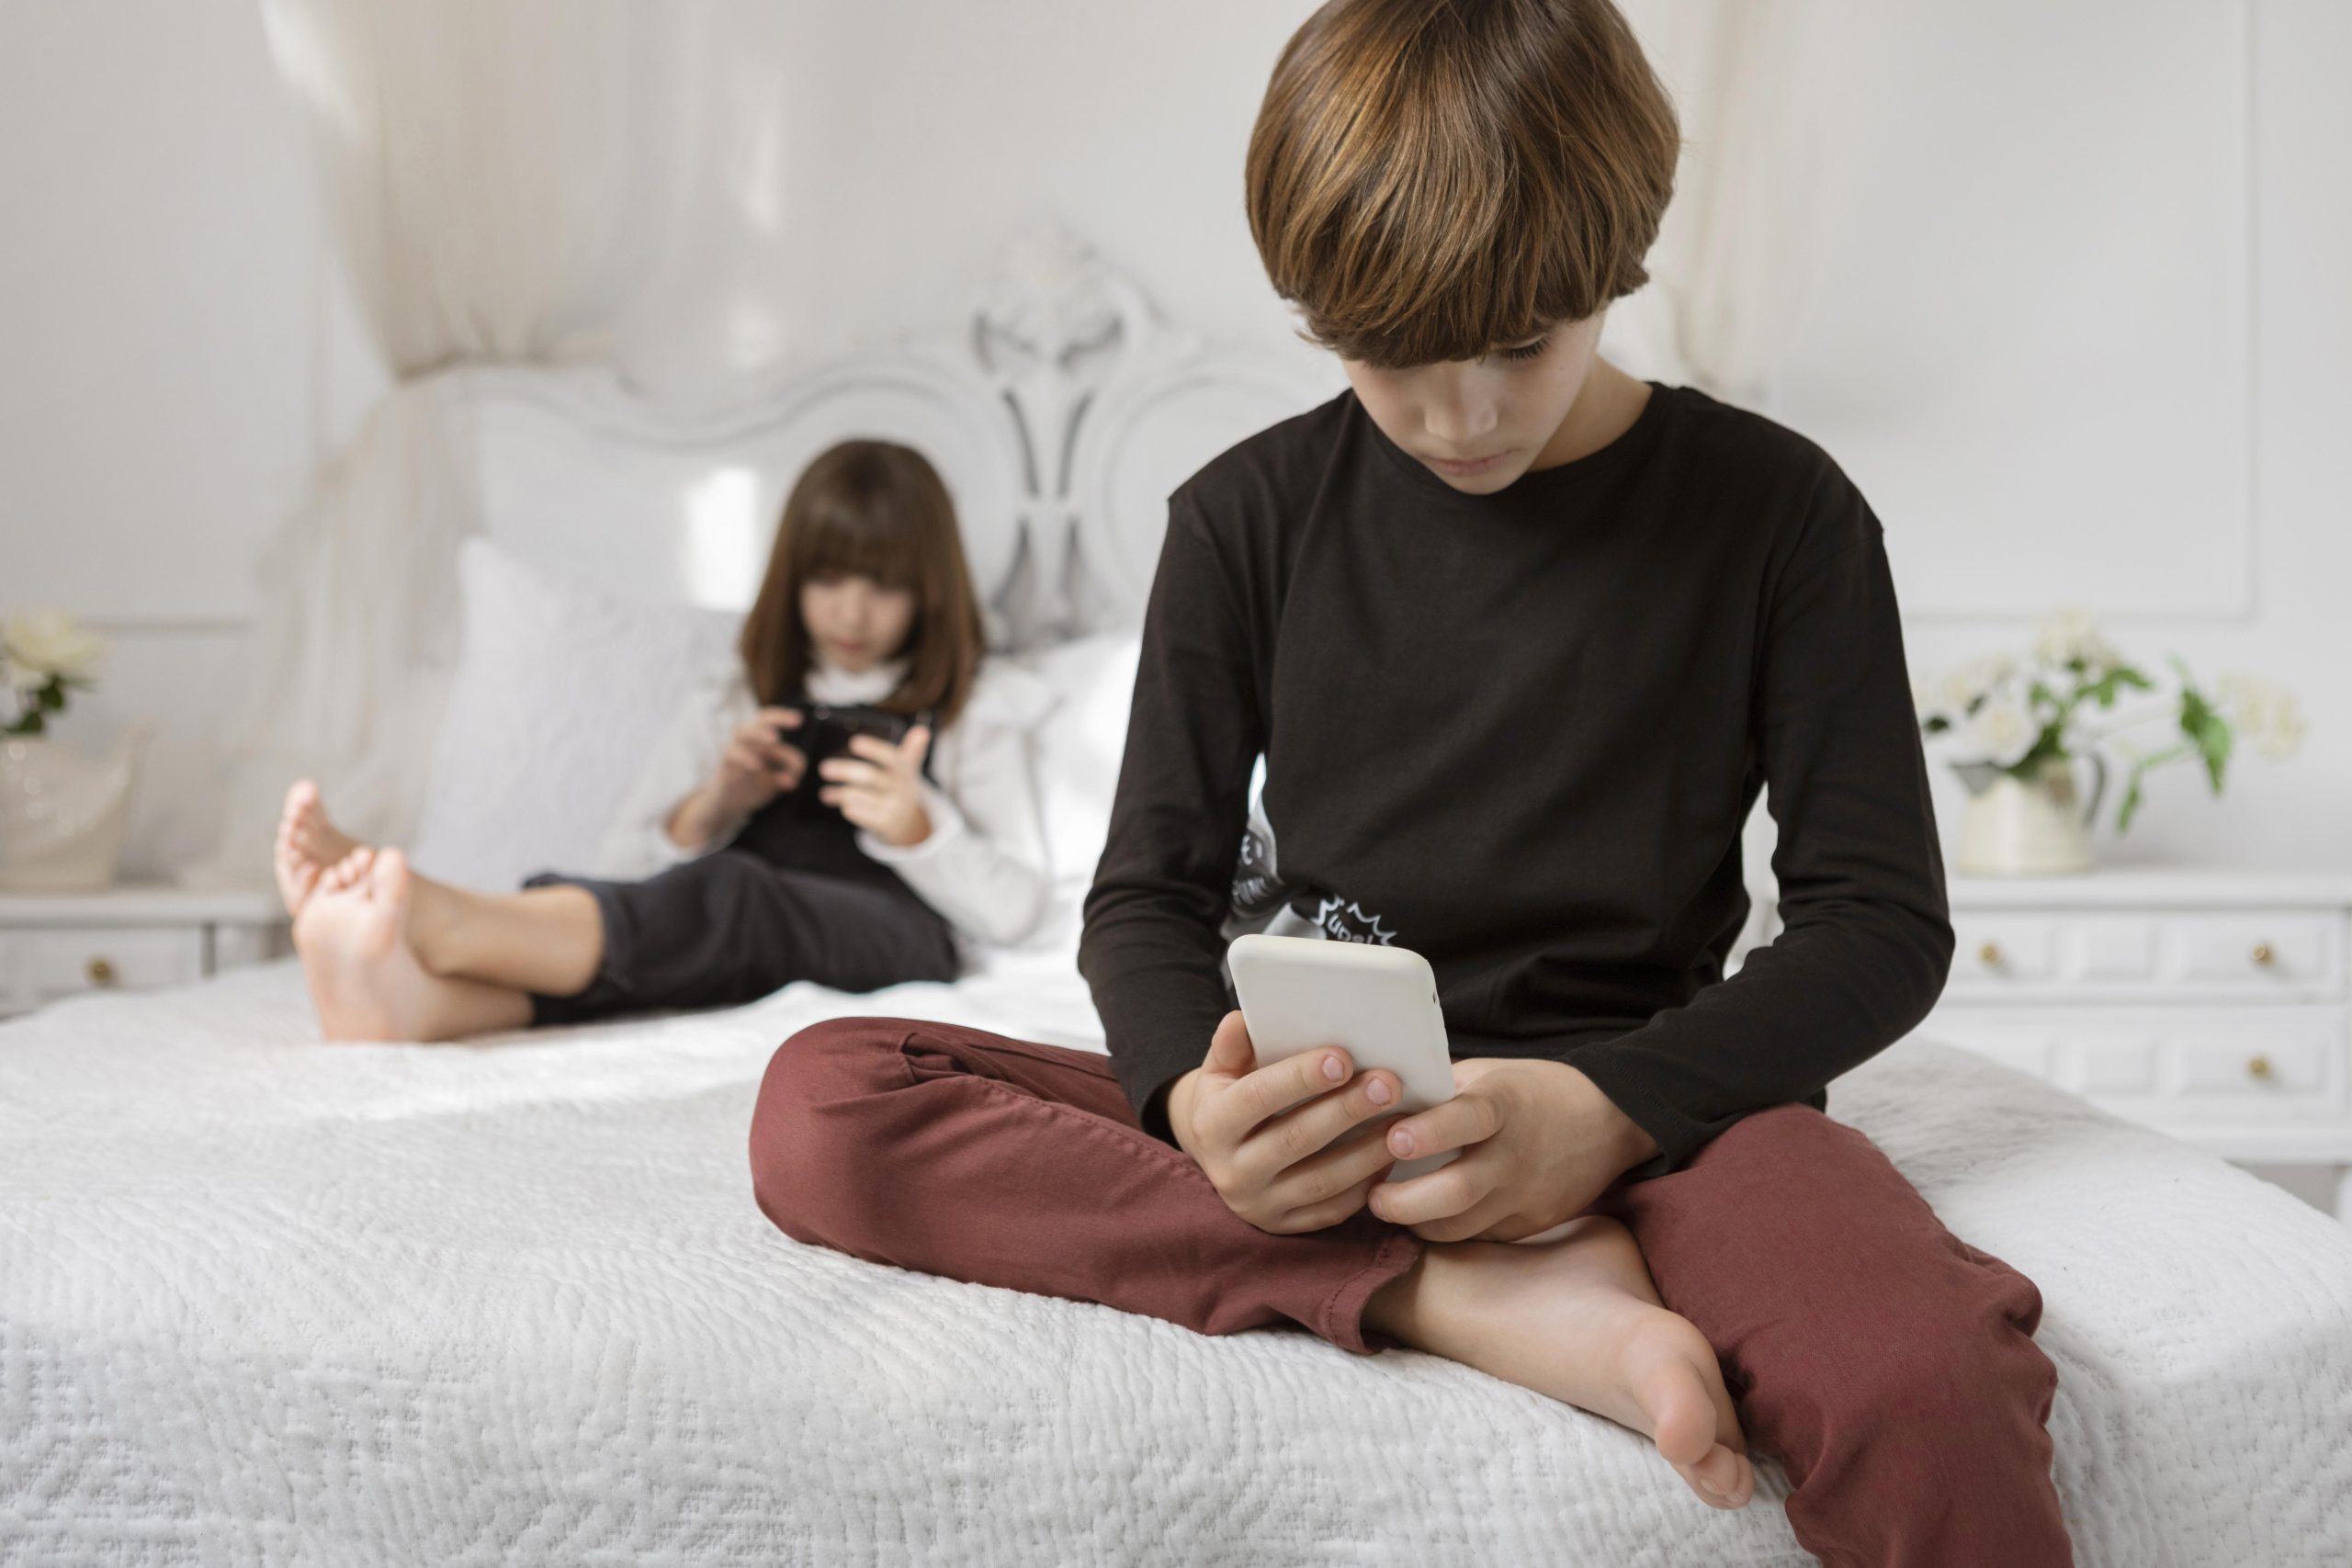 The effects of limited screen time on children’s sleep quality